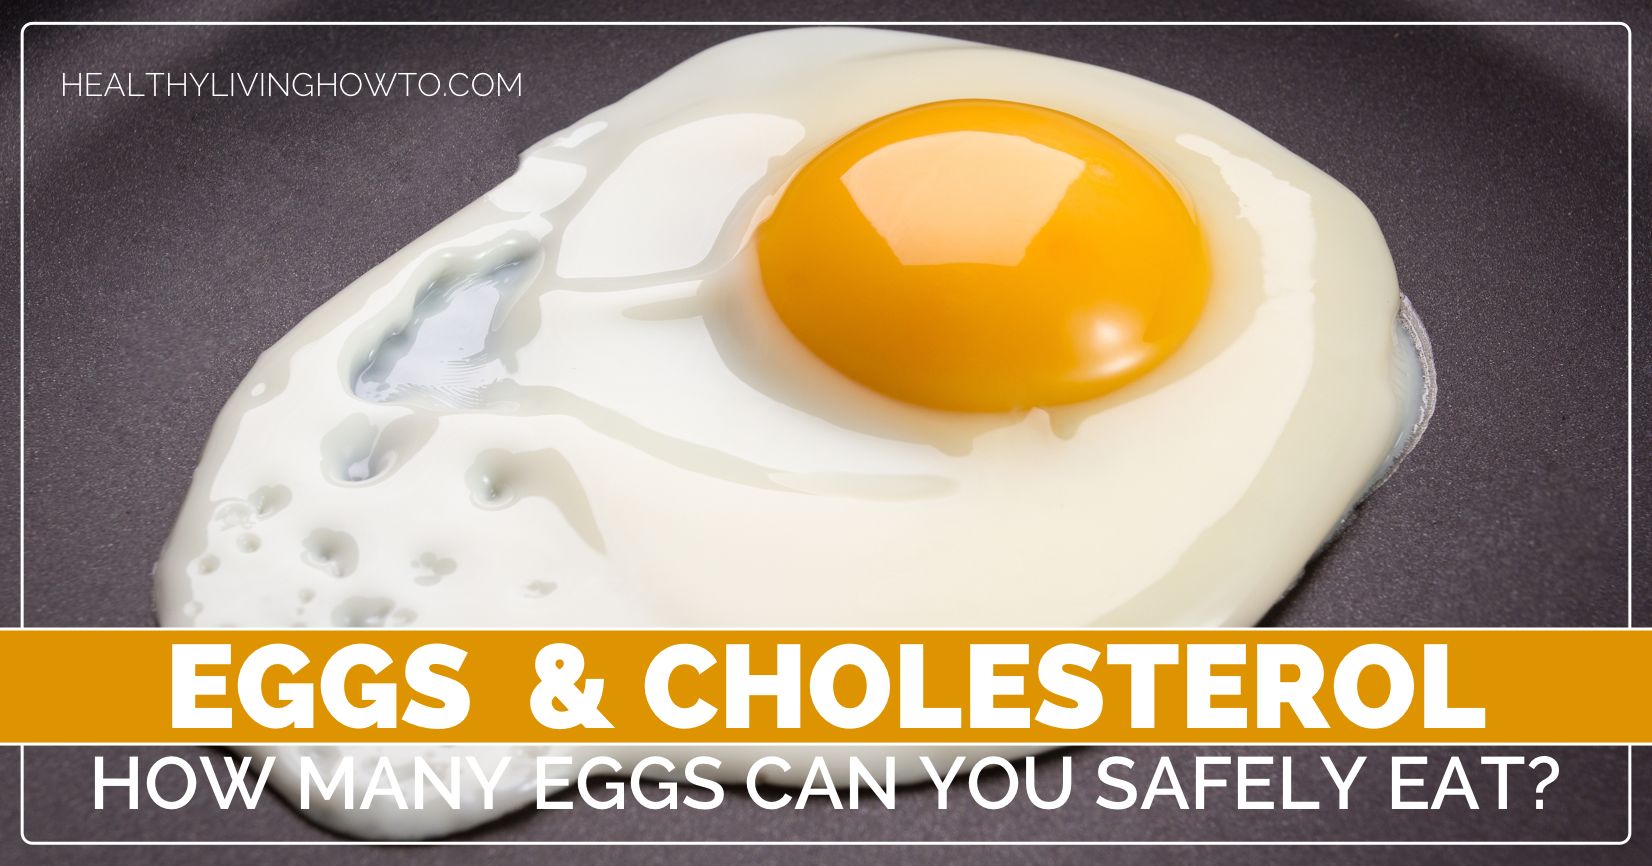 Eggs & Cholesterol. How Many Eggs Can You Safely Eat? | healthylivinghowto.com